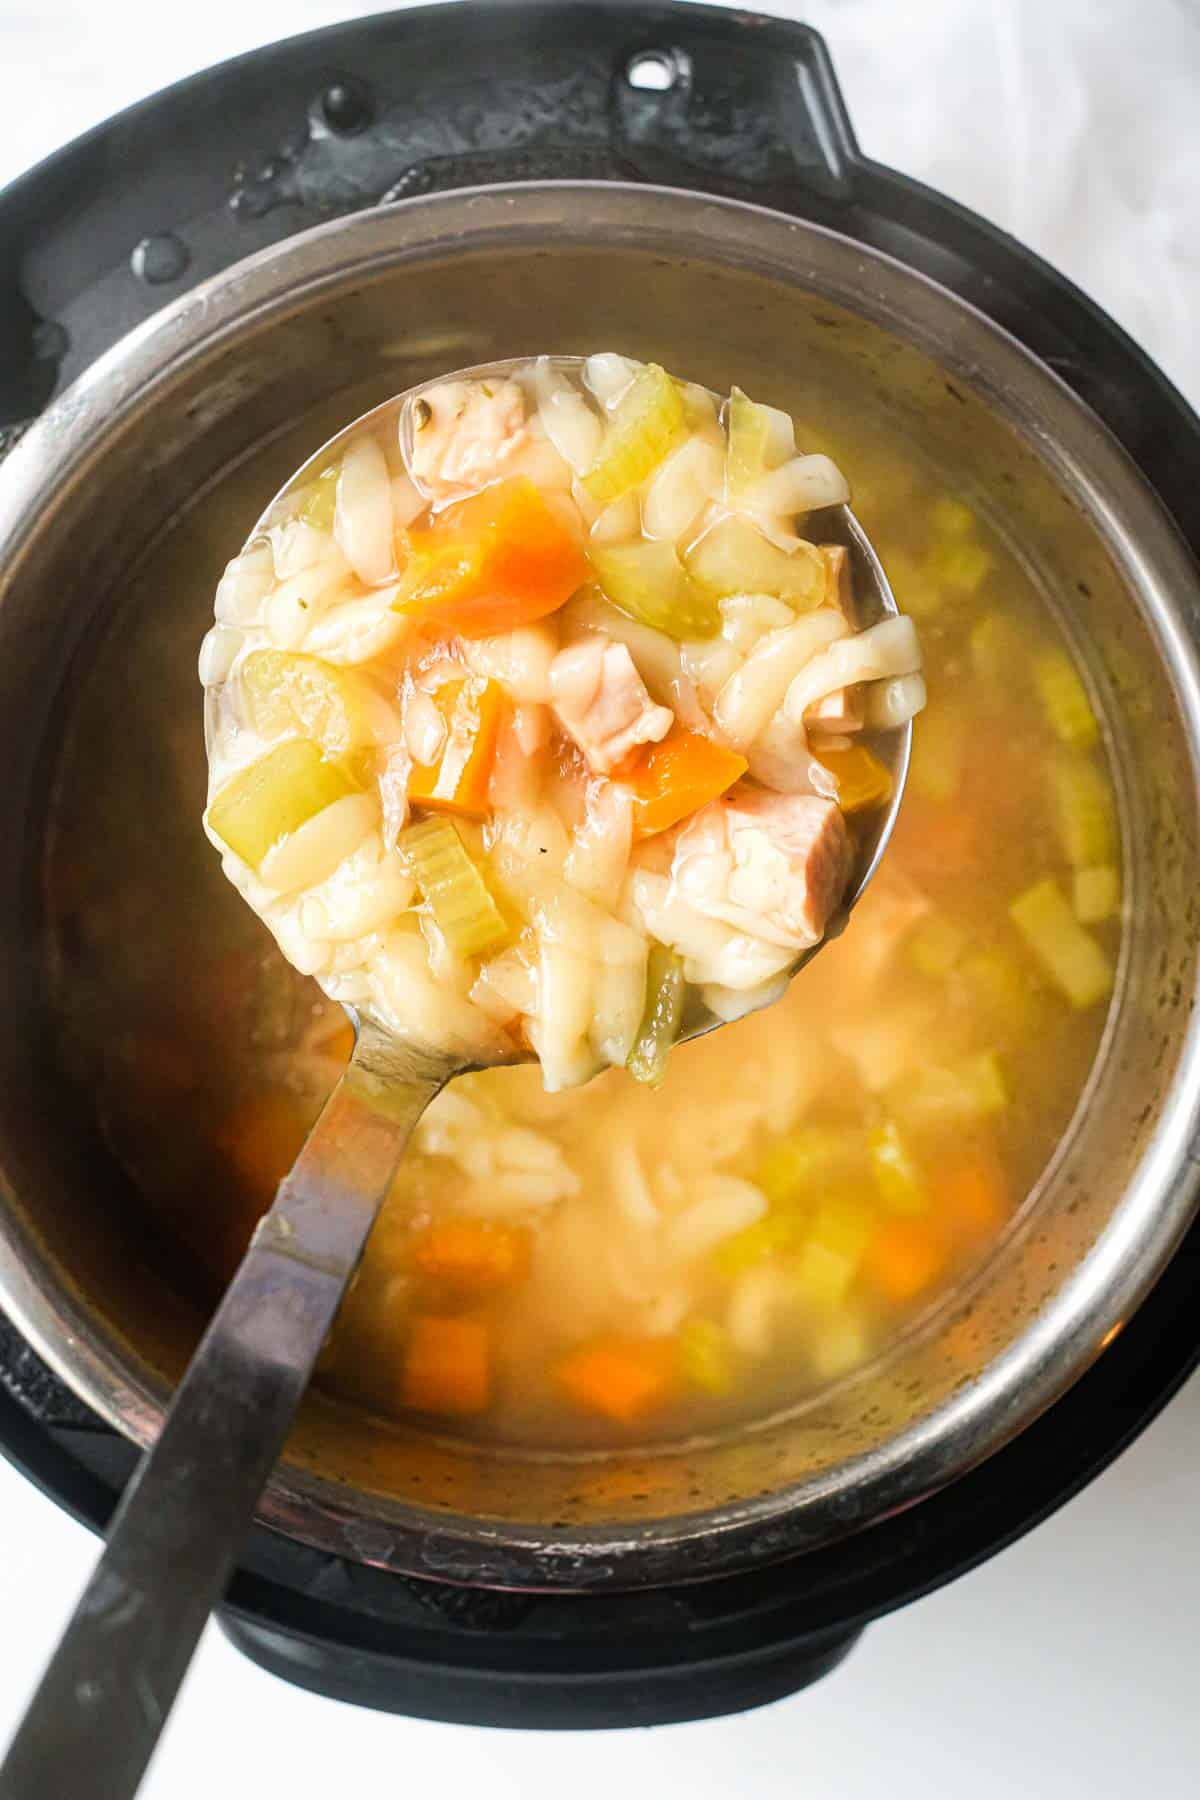 top down view of the completed instant pot lemon chicken orzo soup inside the instant pot with a ladle removing one scoop